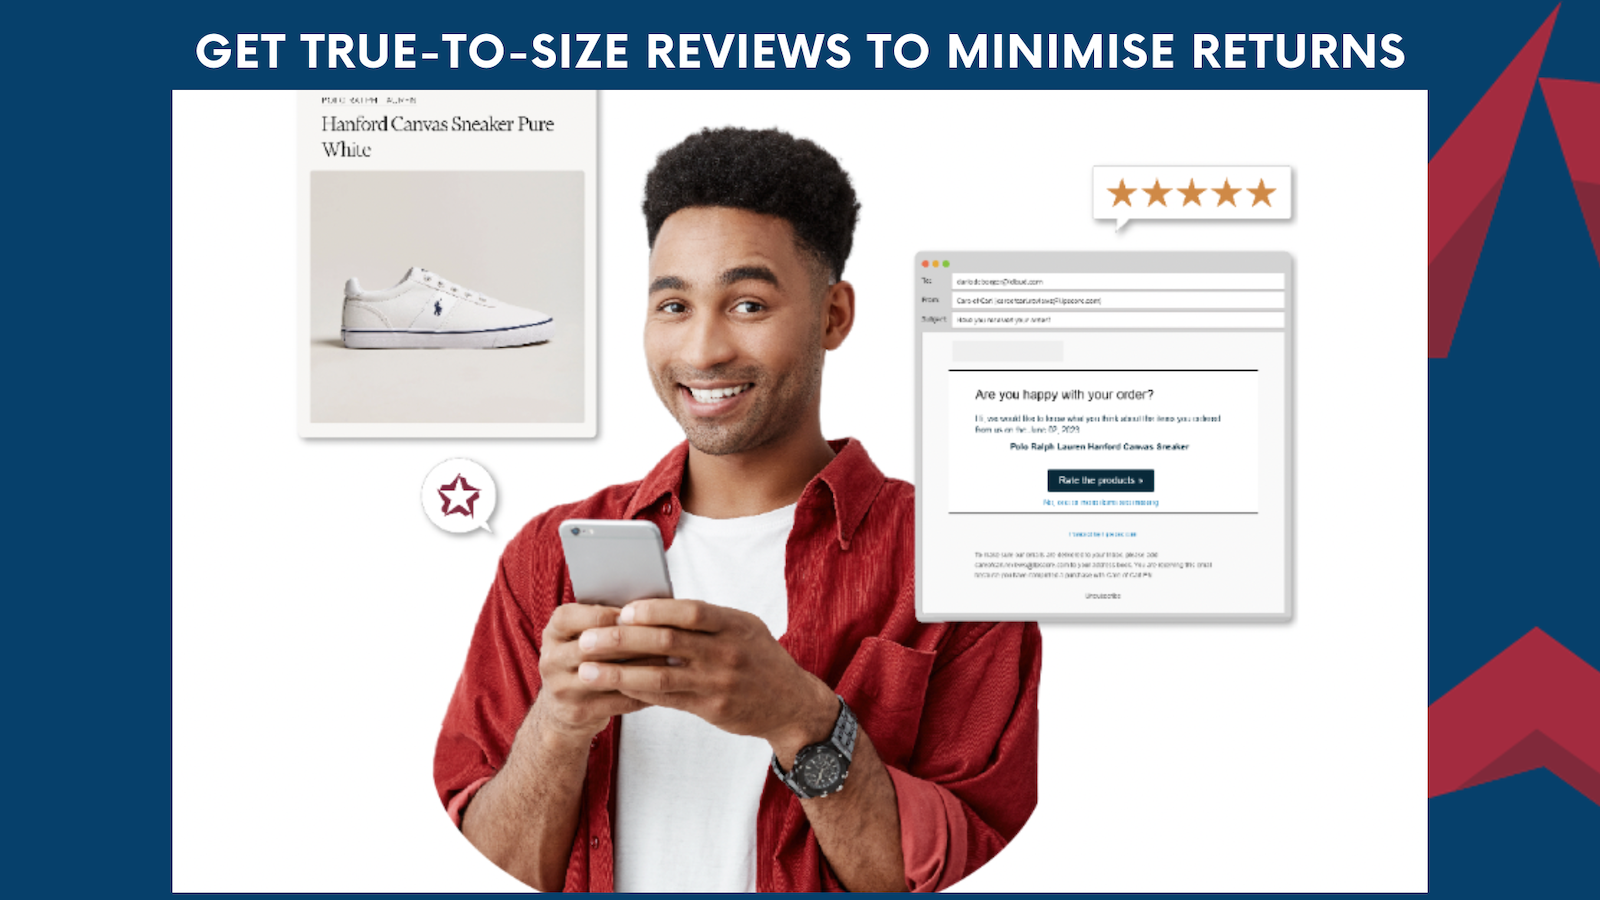 Gather true-to-size product reviews to minimise returns